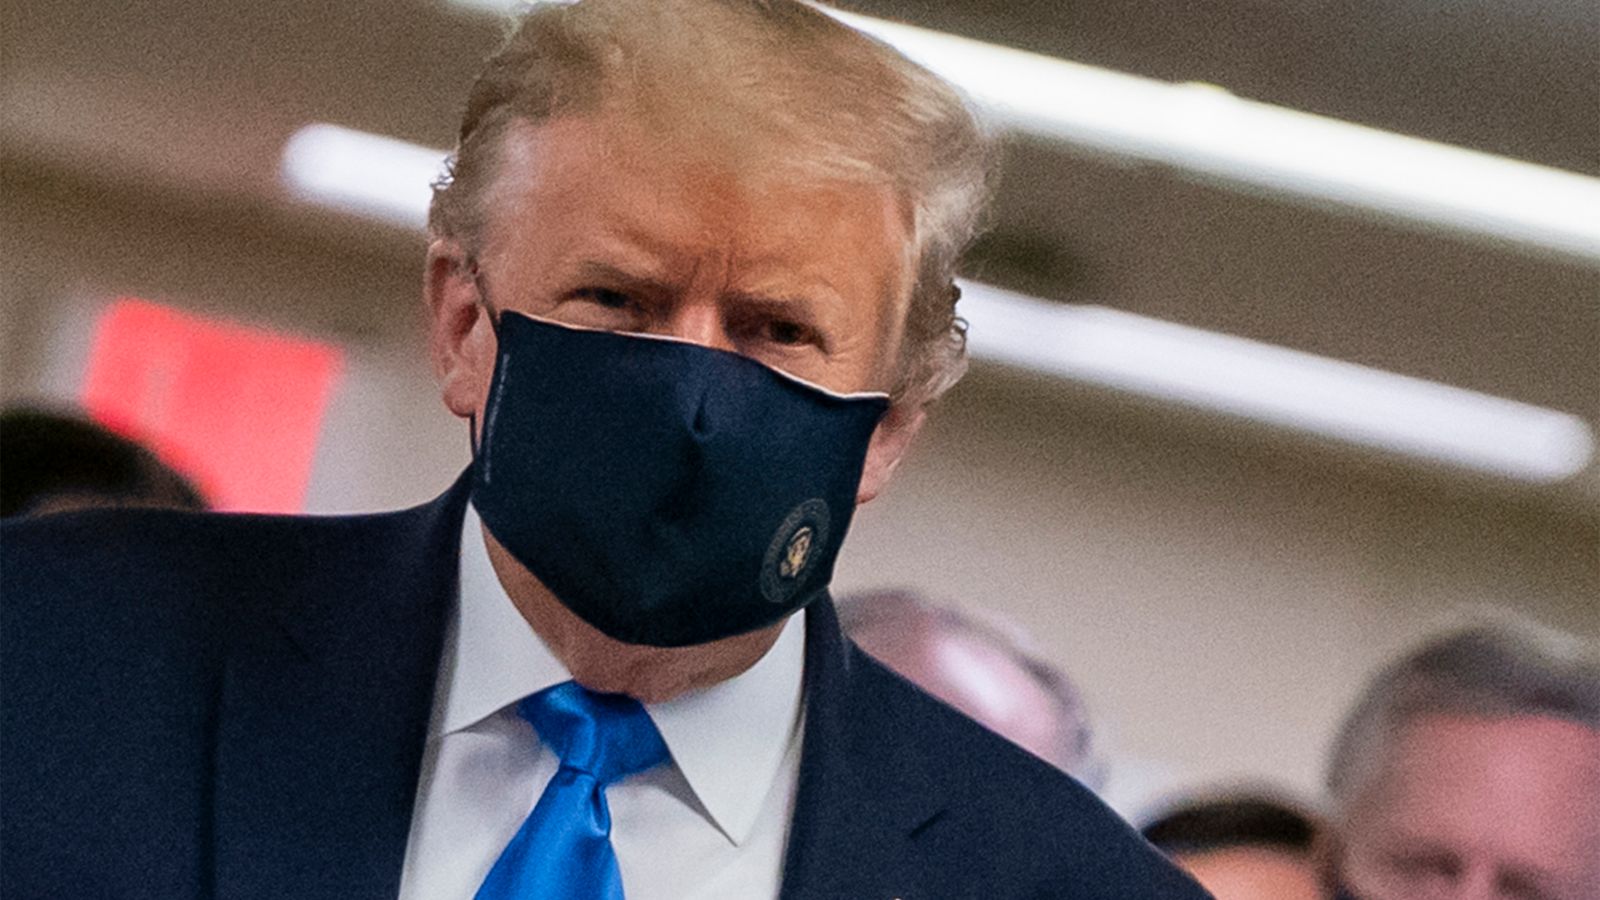 US President Donald Trump wears a mask as he visits Walter Reed National Military Medical Center in Bethesda, Maryland' on July 11, 2020